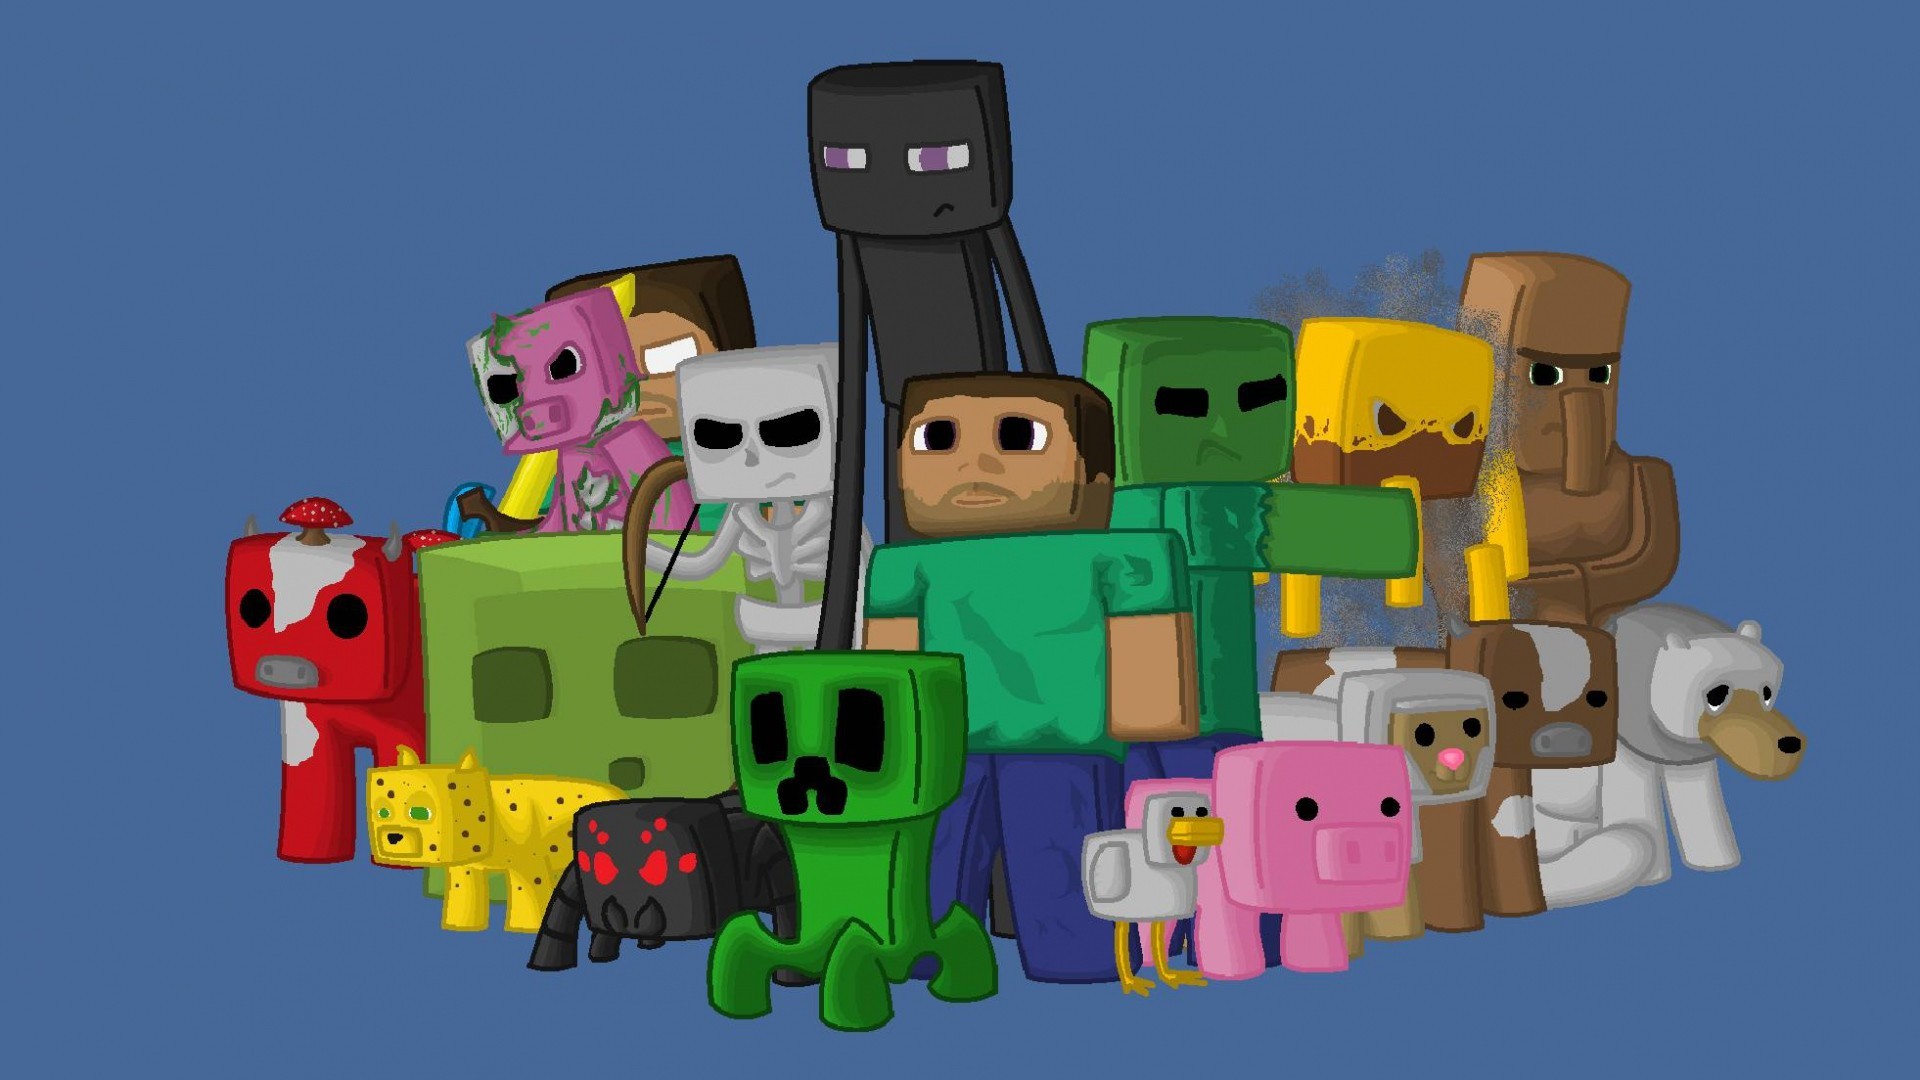 1920x1080  Minecraft Wallpapers Creator (33 Wallpapers) - Adorable Wallpapers